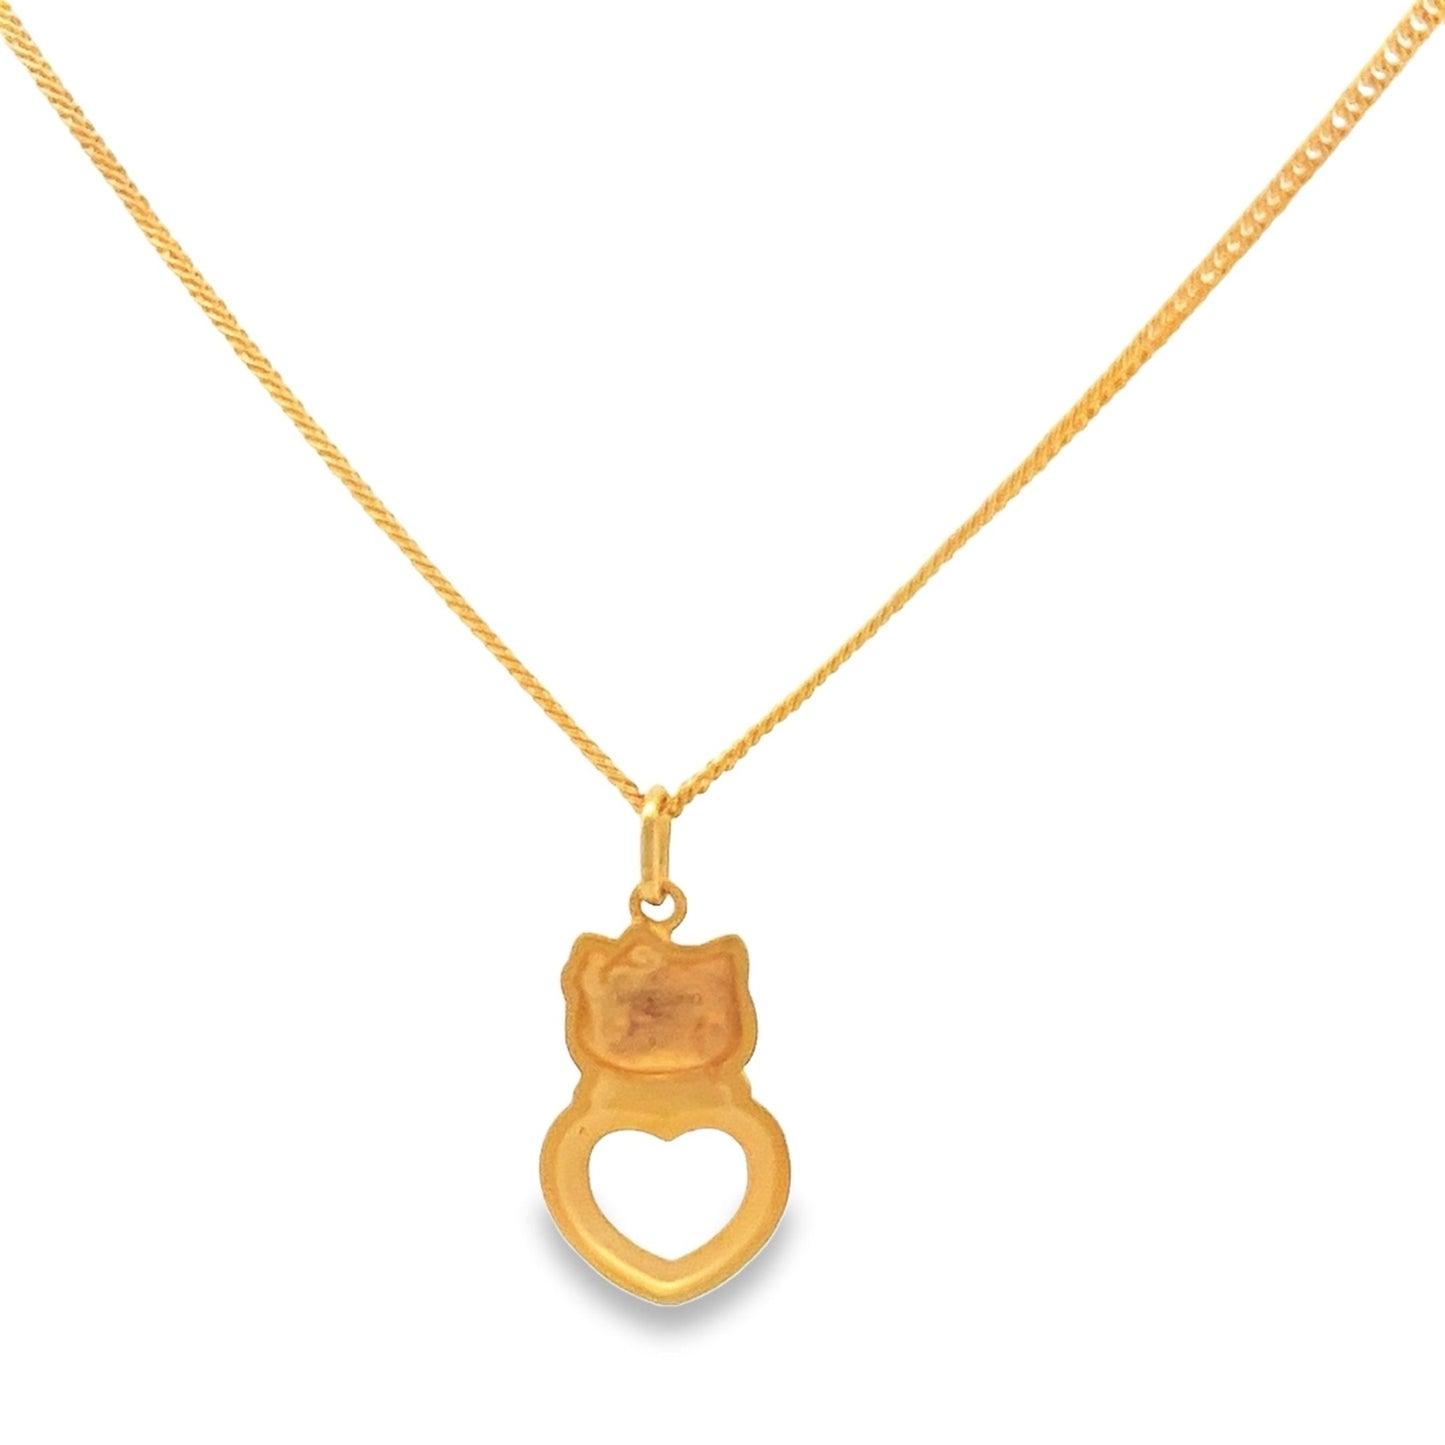 24ct solid gold necklace 006617NecklaceRetroGold